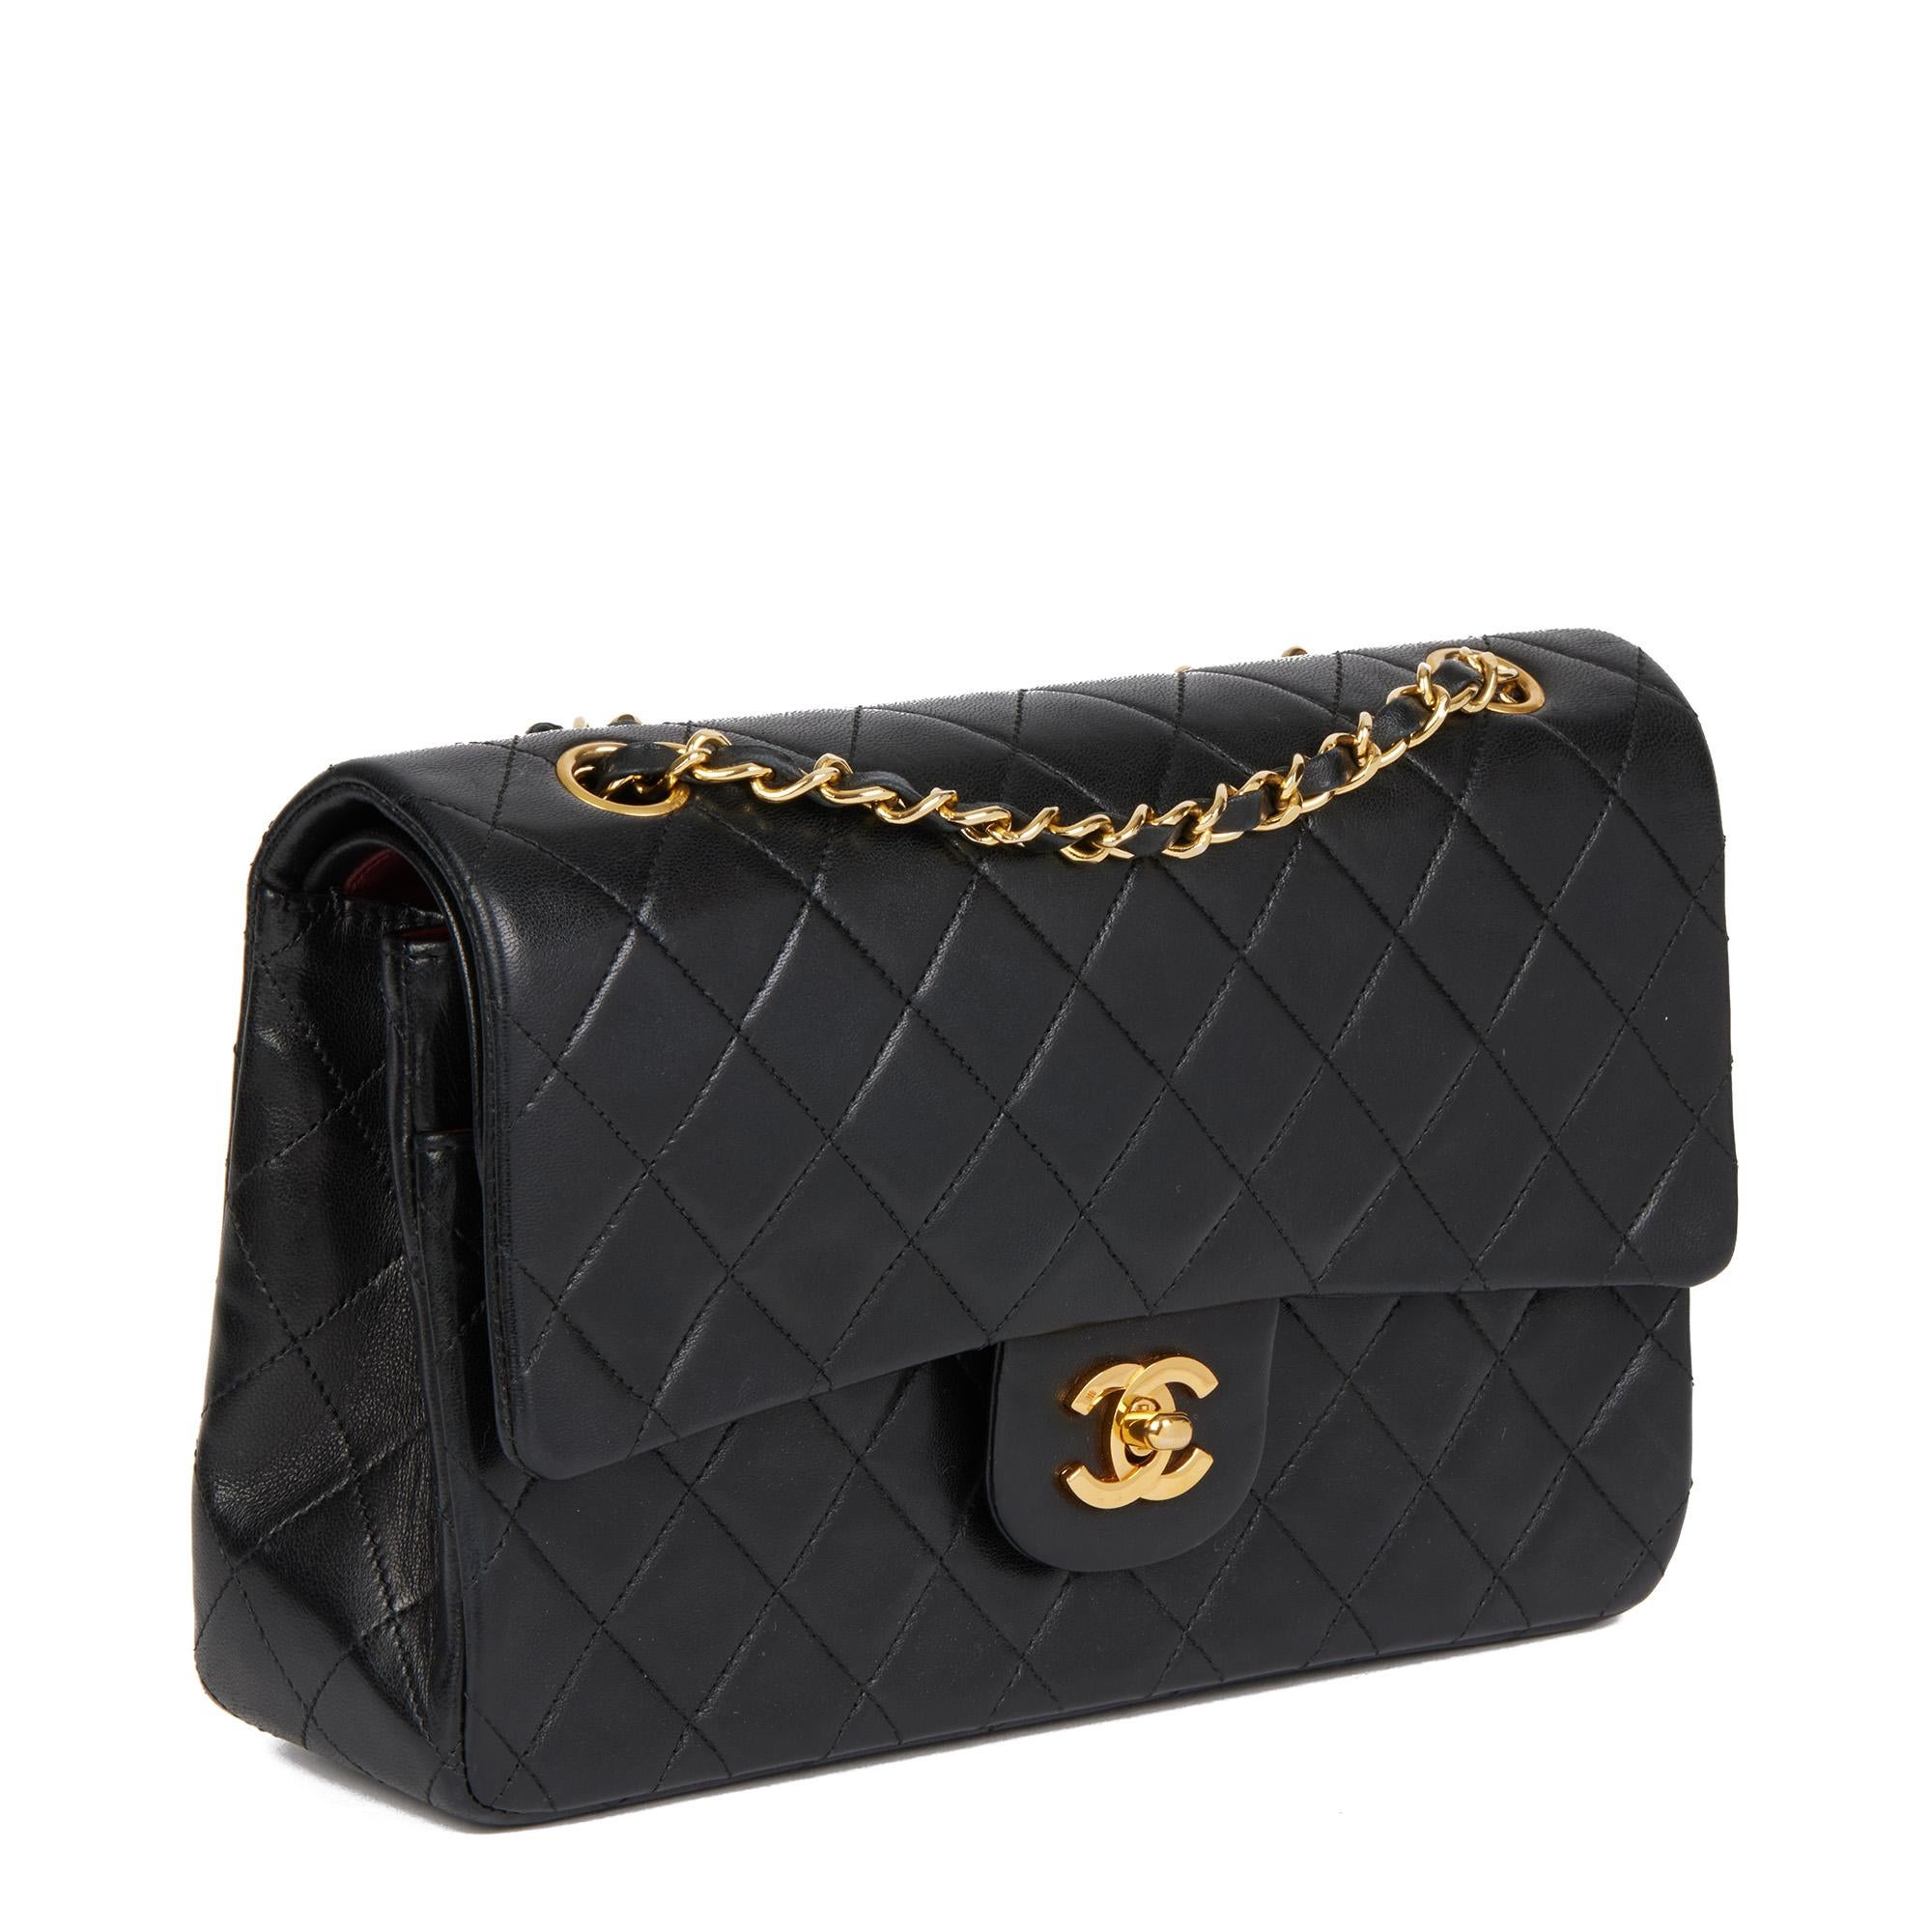 CHANEL
Black Quilted Lambskin Vintage Medium Classic Double Flap Bag

Serial Number: 1515293
Age (Circa): 1990
Accompanied By: Chanel Dust Bag, Box, Authenticity Card (Card Is Damaged)
Authenticity Details: Authenticity Card, Serial Sticker (Made In